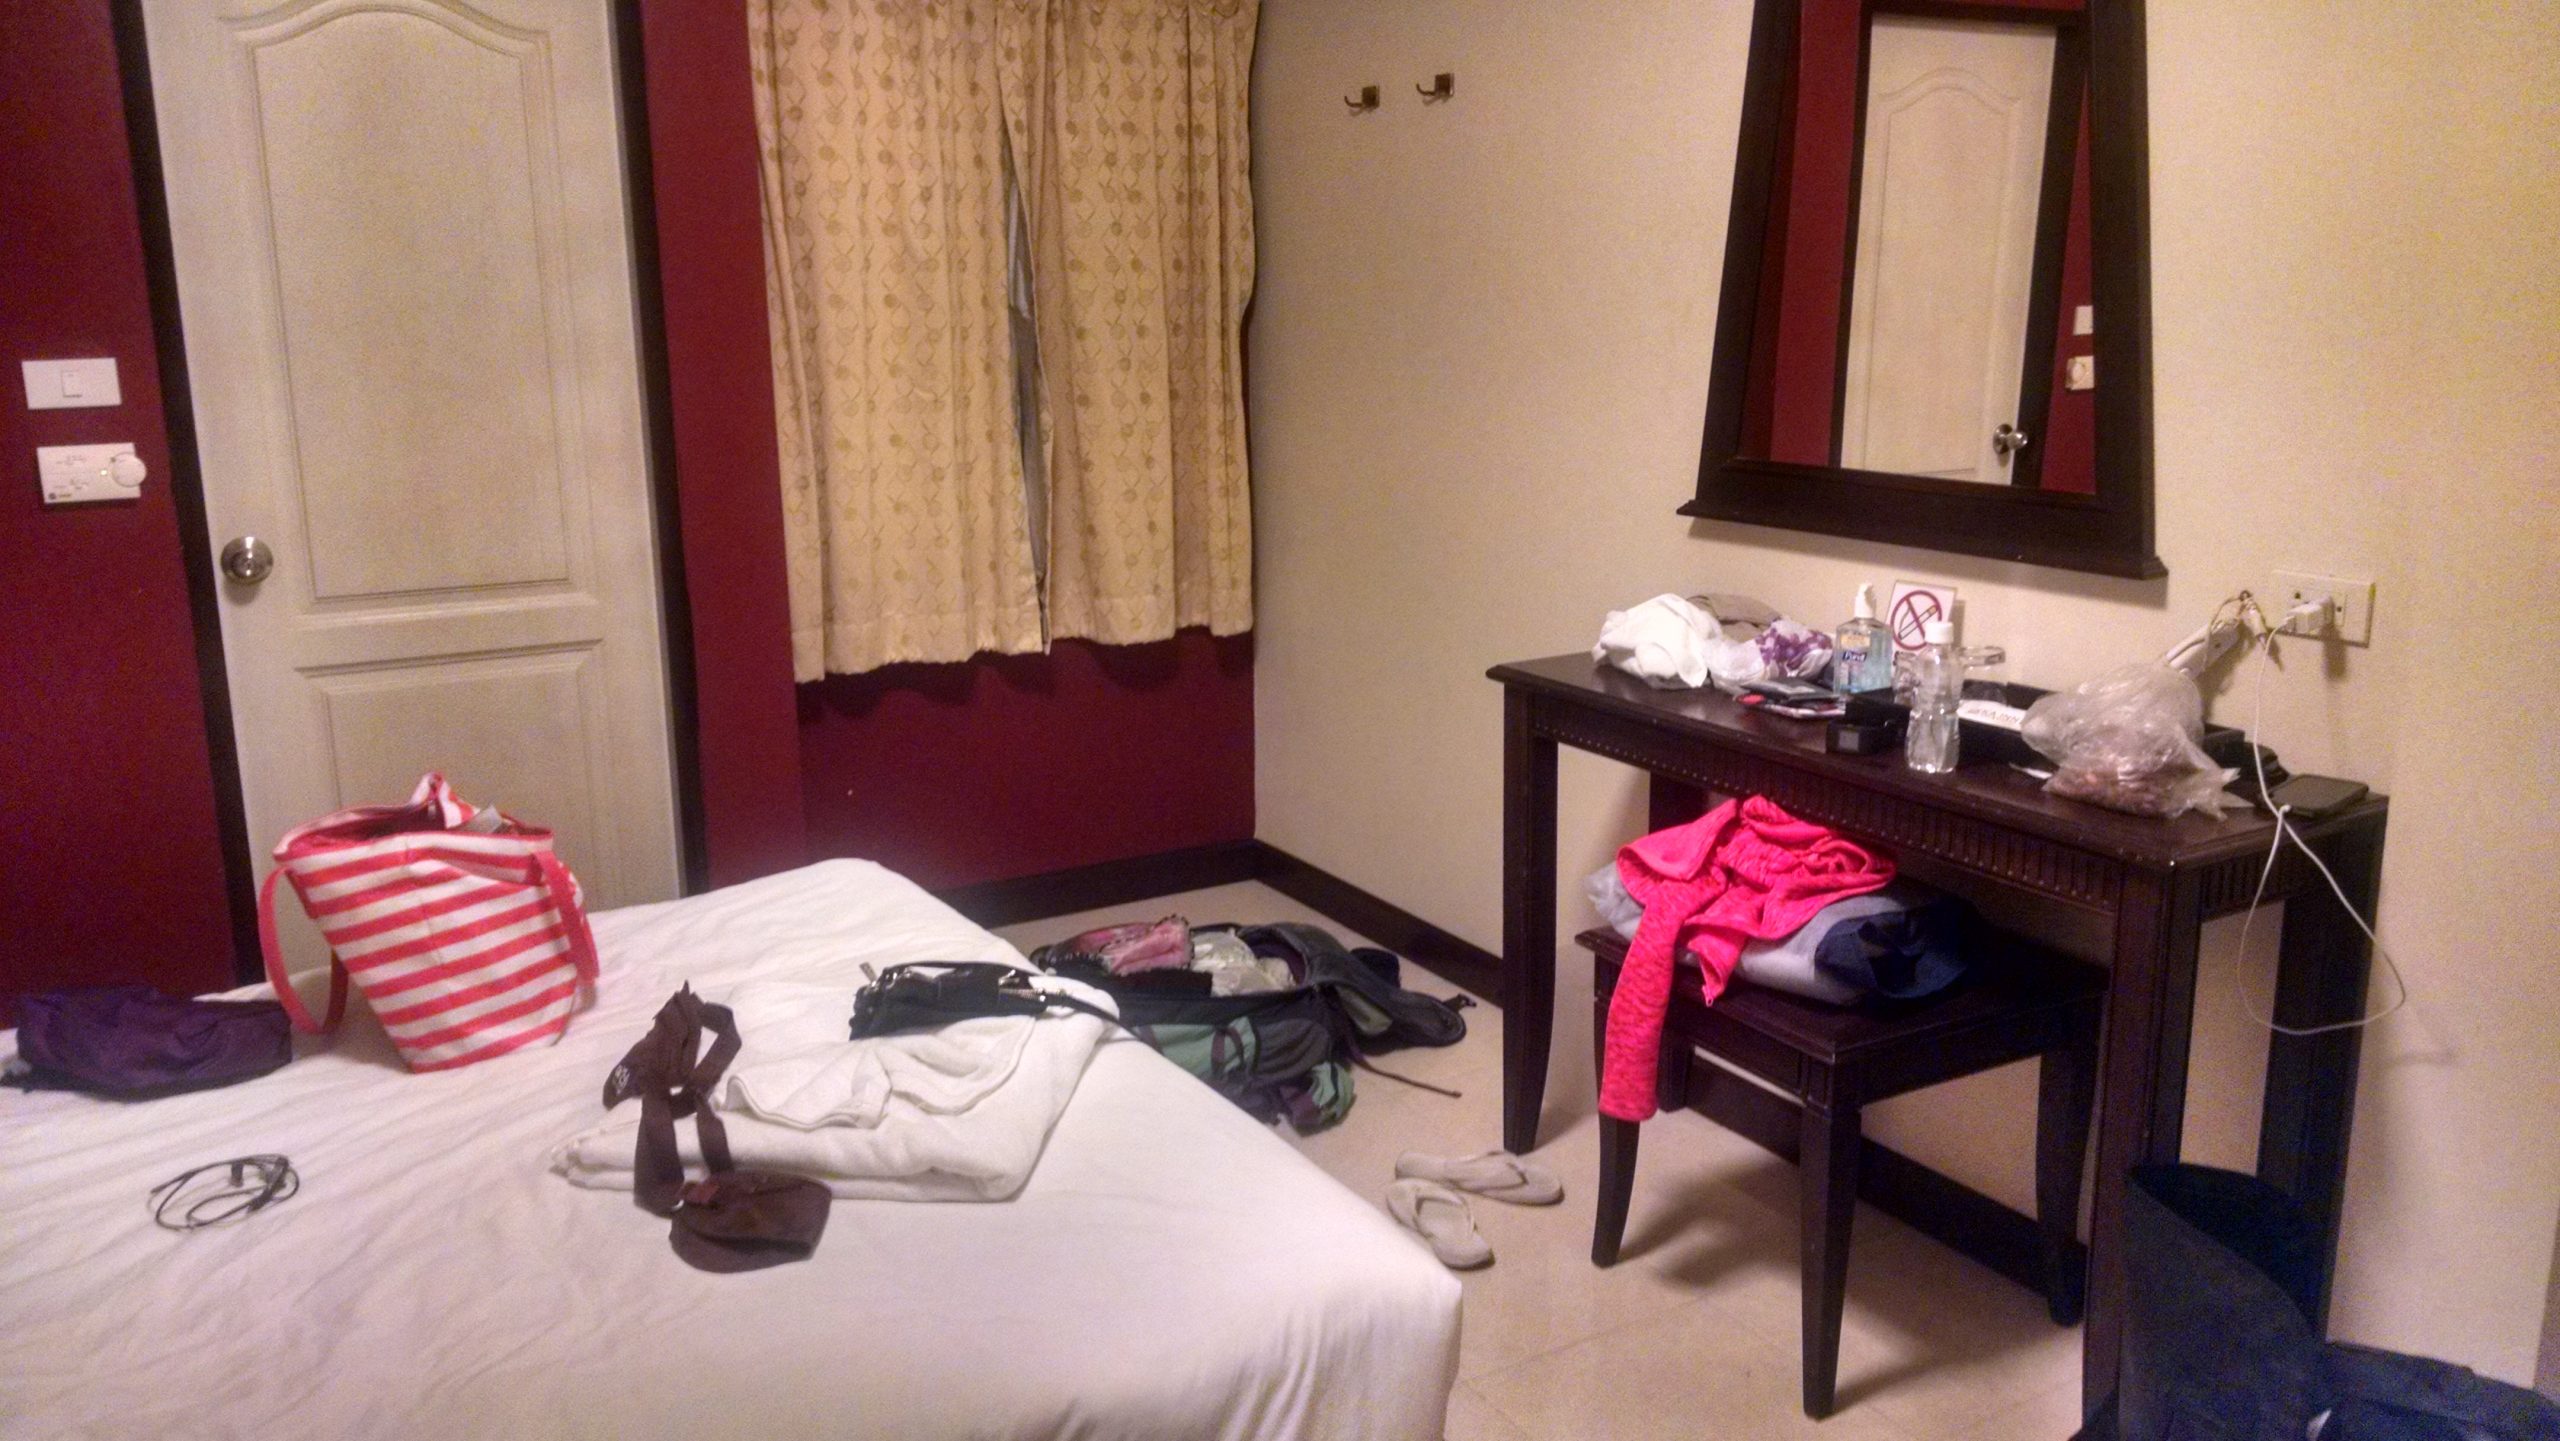 Our cheap room in Bangkok